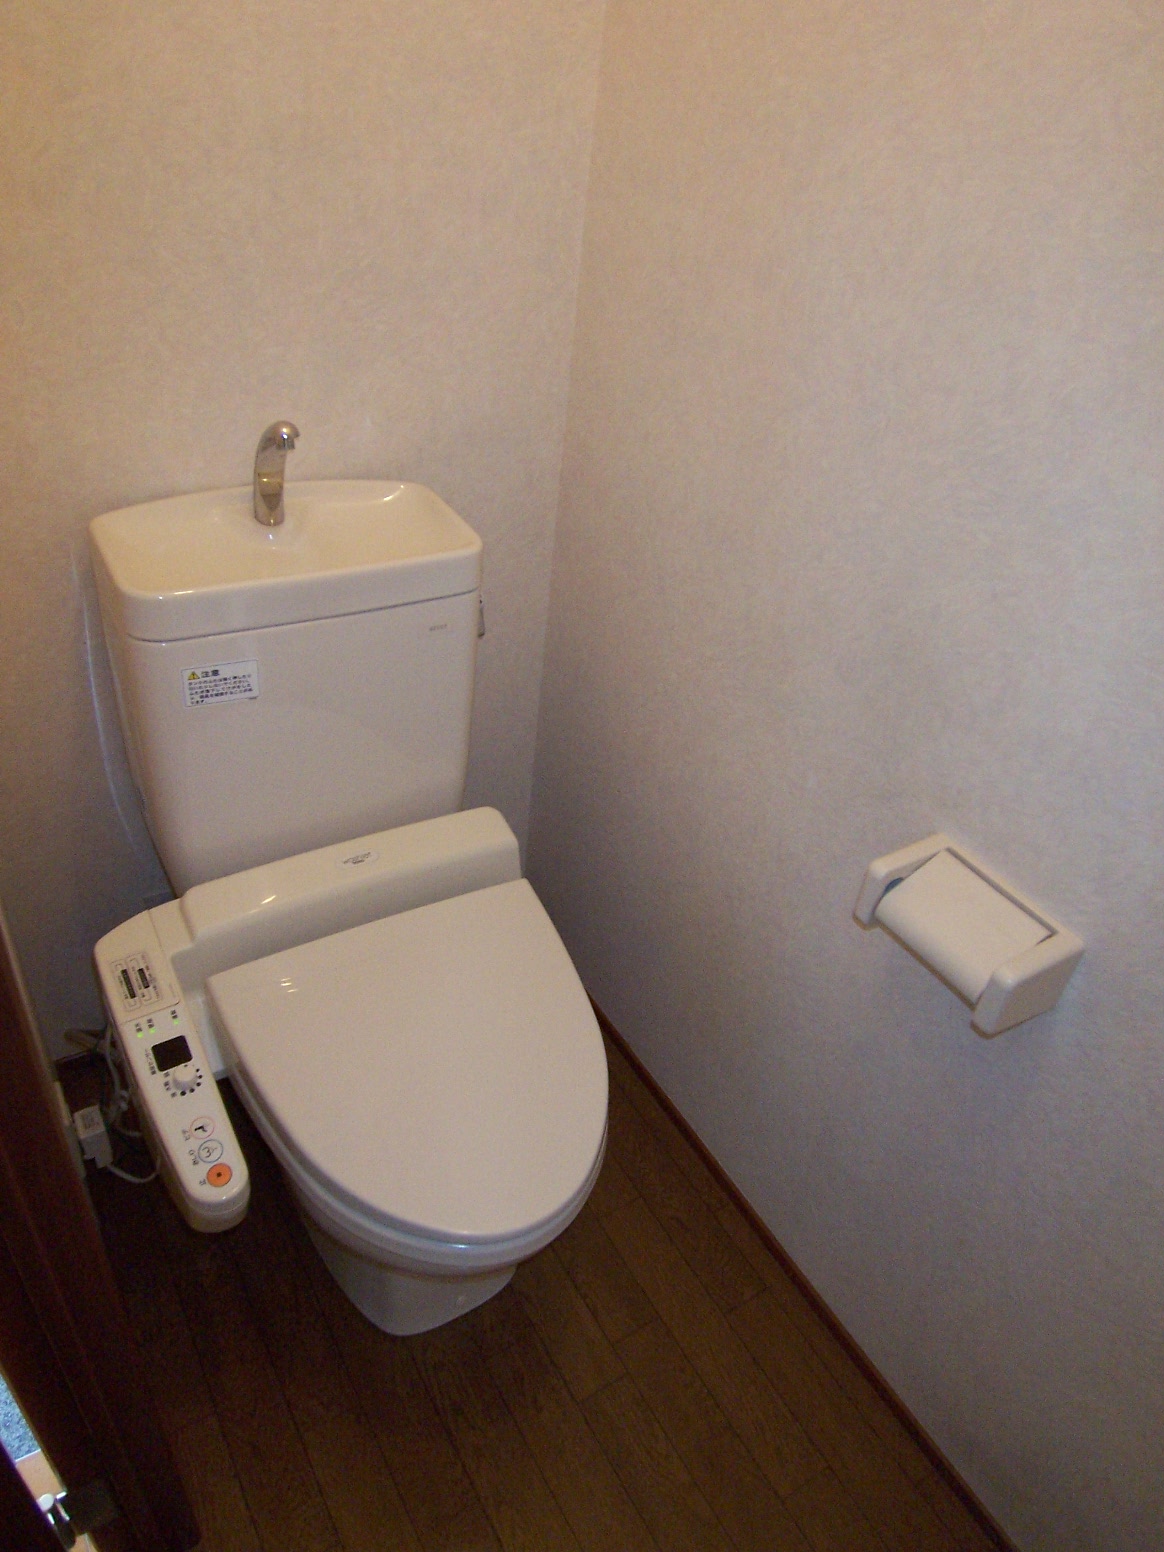 Toilet. Since the washing heating toilet seat is comfortable